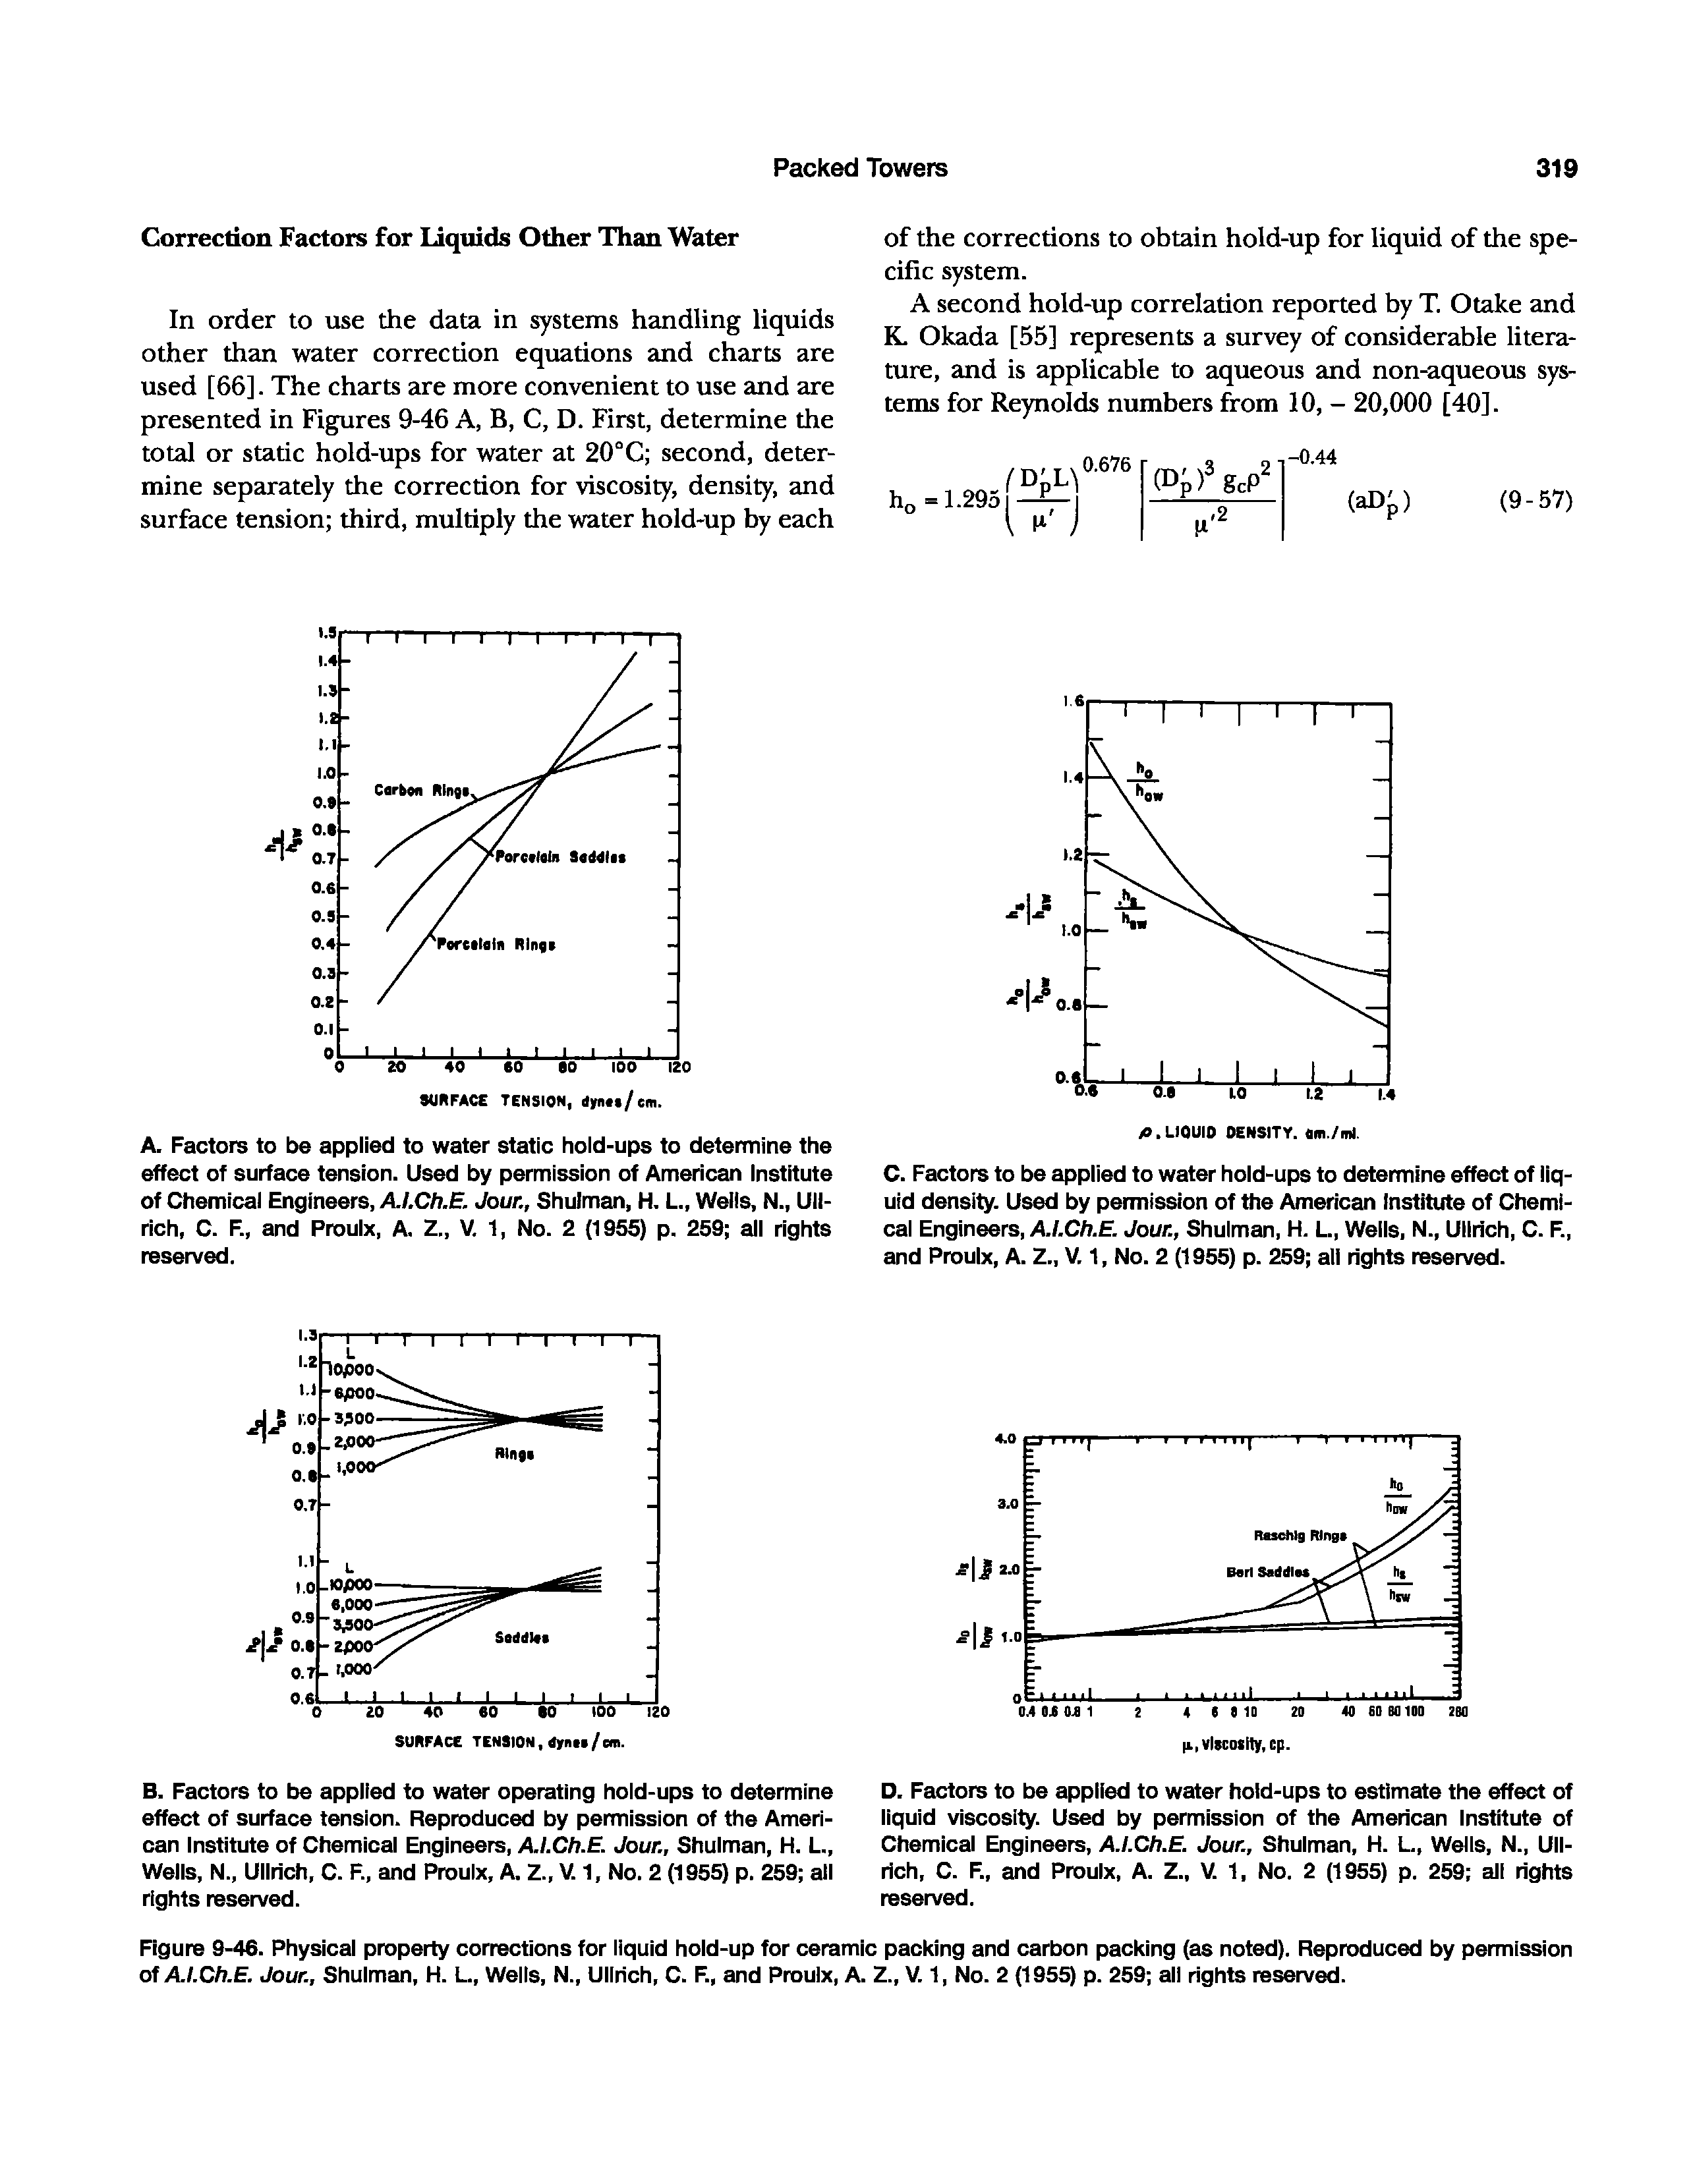 Figure 9-46. Physical property corrections for liquid hold-up for ceramic packing and carbon packing (as noted). Reproduced by permission of A/.C/r.E. Jour., Shulman, H. L., Wells, N., Ullrich, C. F., and Proulx, A. Z., V. 1, No. 2 (1955) p. 259 all rights reserved.